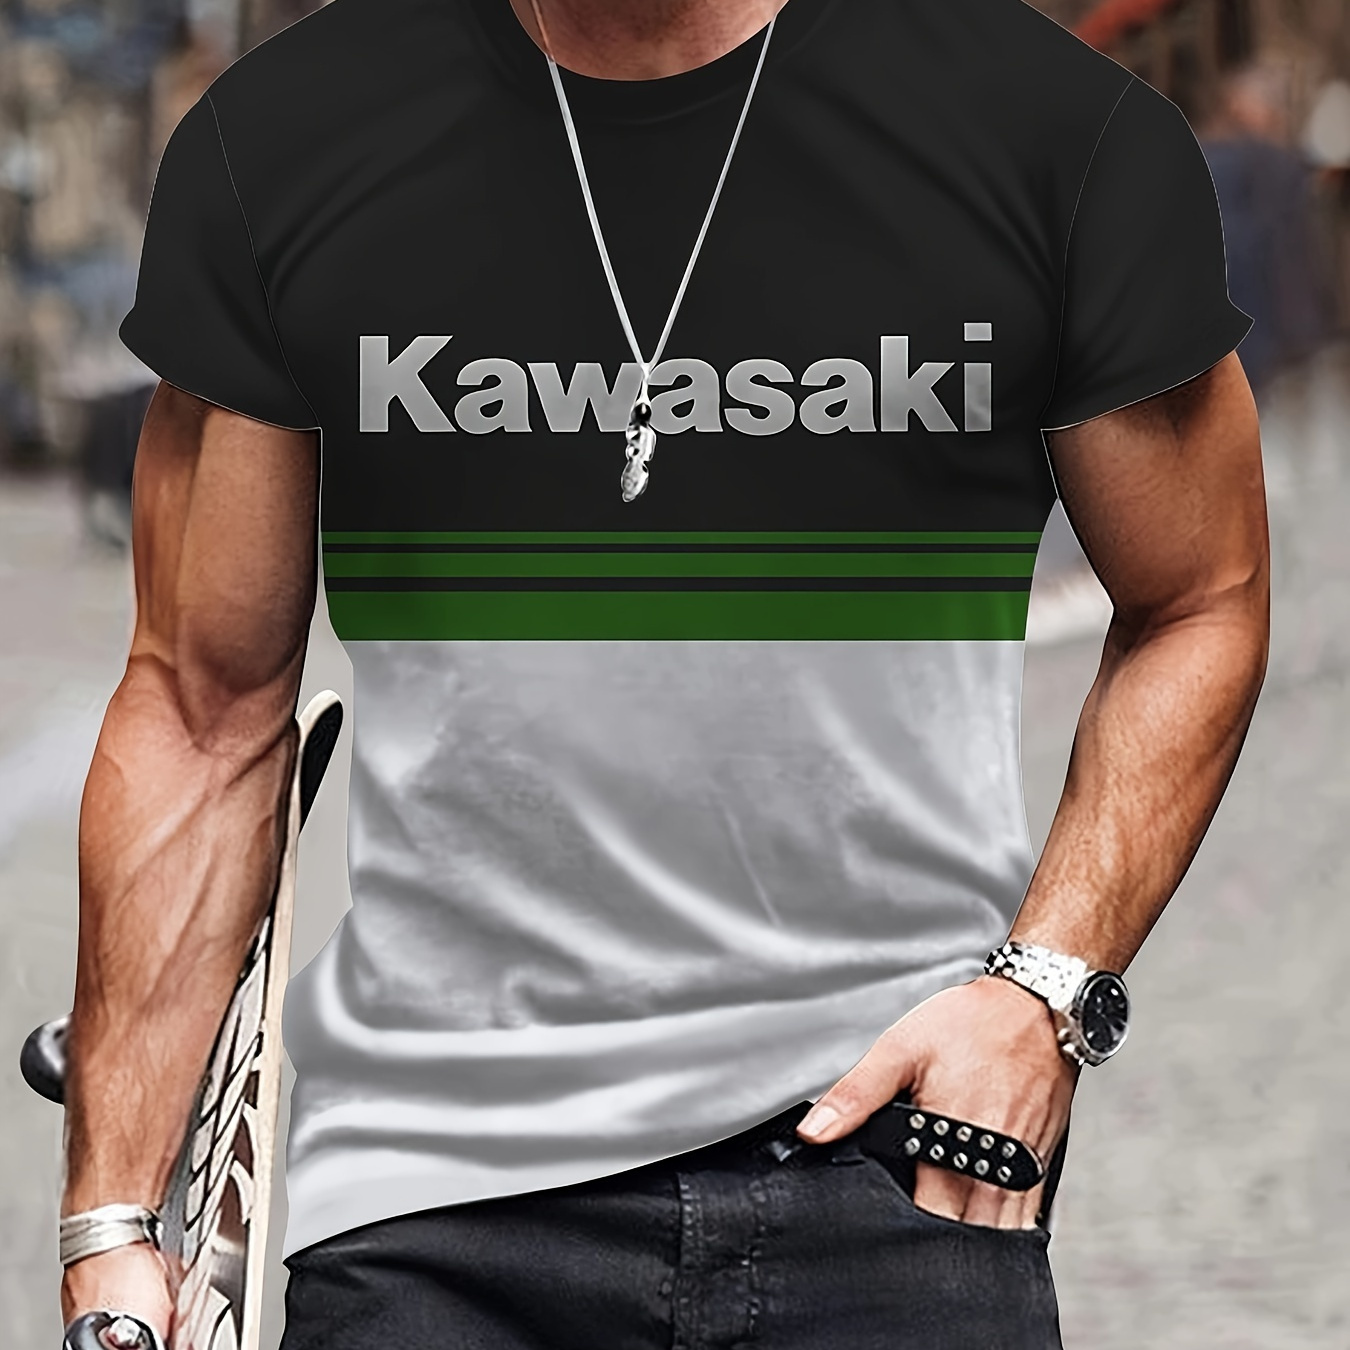 

Stripe Pattern And Alphabet Print "kawasaki" T-shirt With Crew Neck And Short Sleeve, Casual And Cool Sports Tops For Men's Summer Fitness And Workout Wear